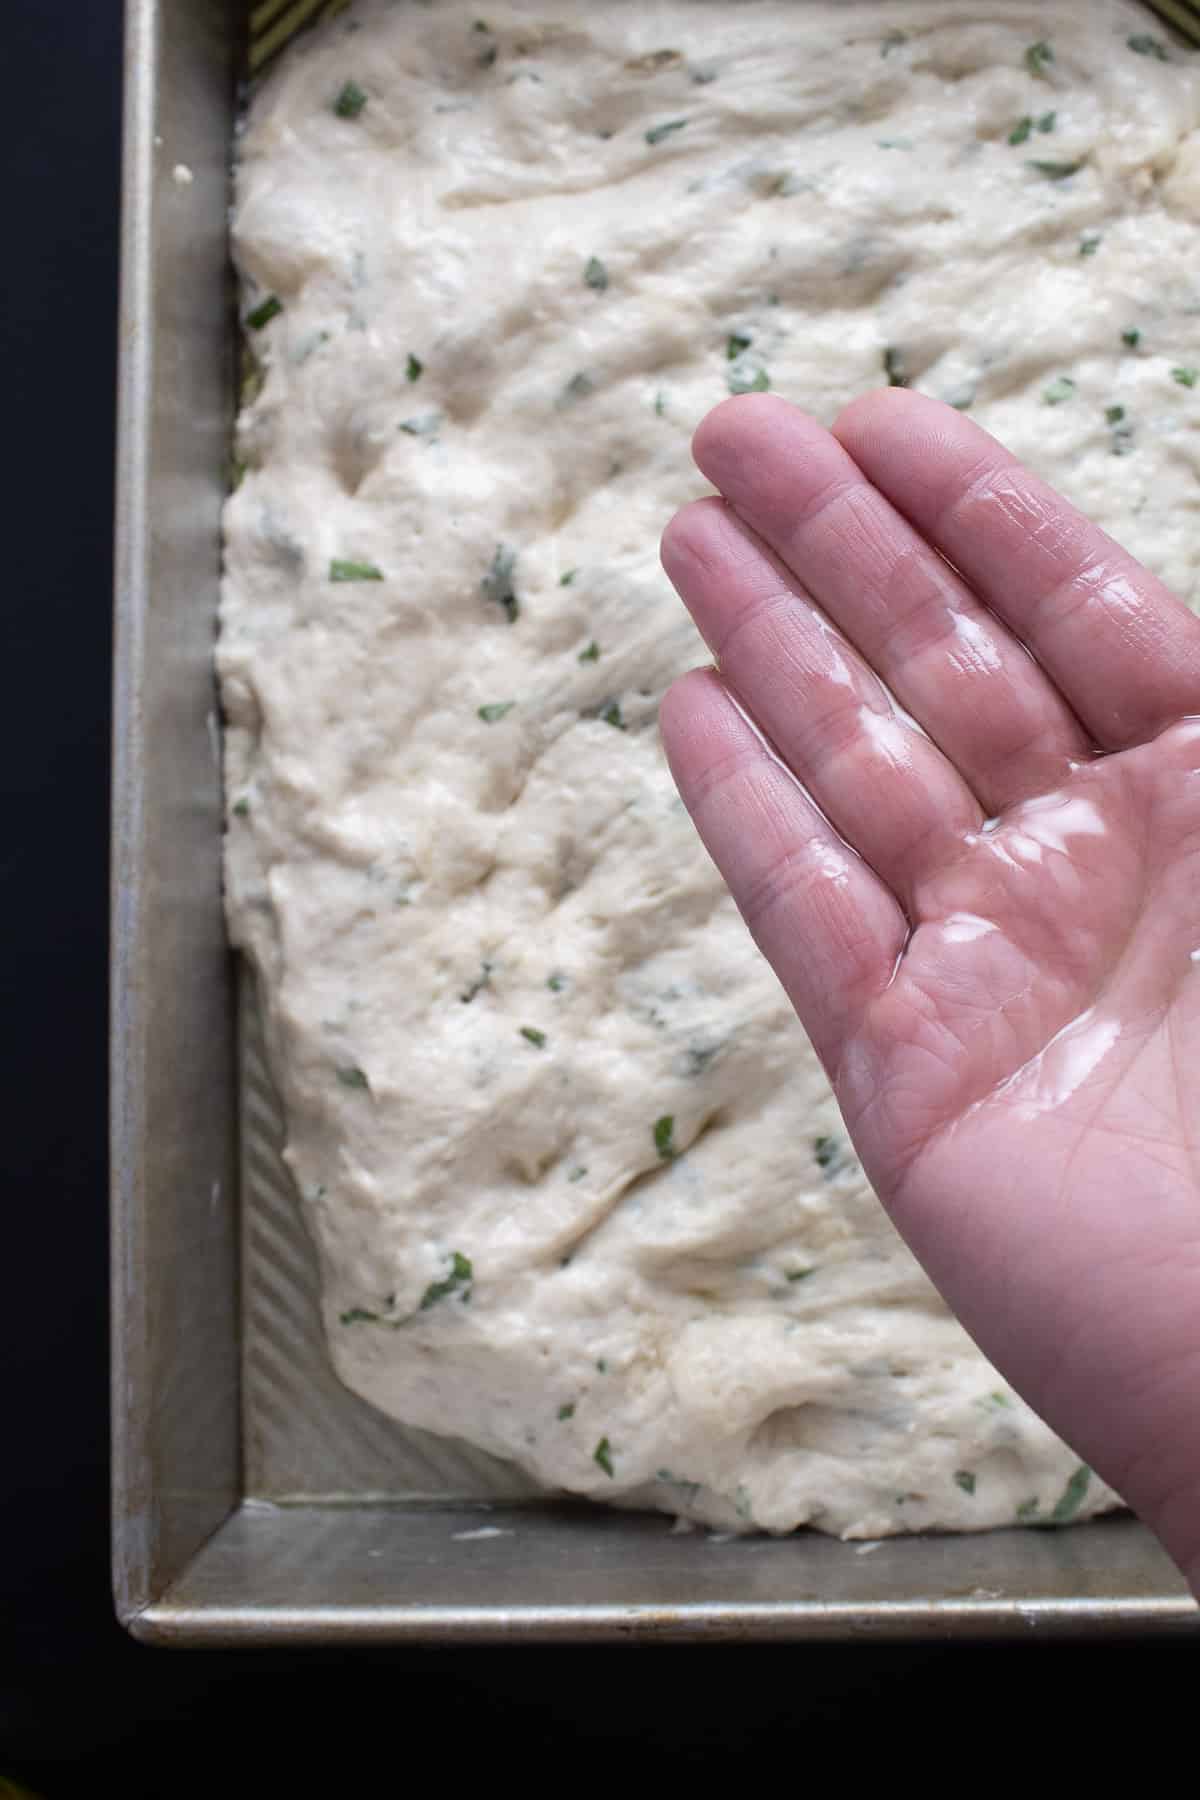 An oiled hand ready to flip the dough which rests in an oiled baking dish.